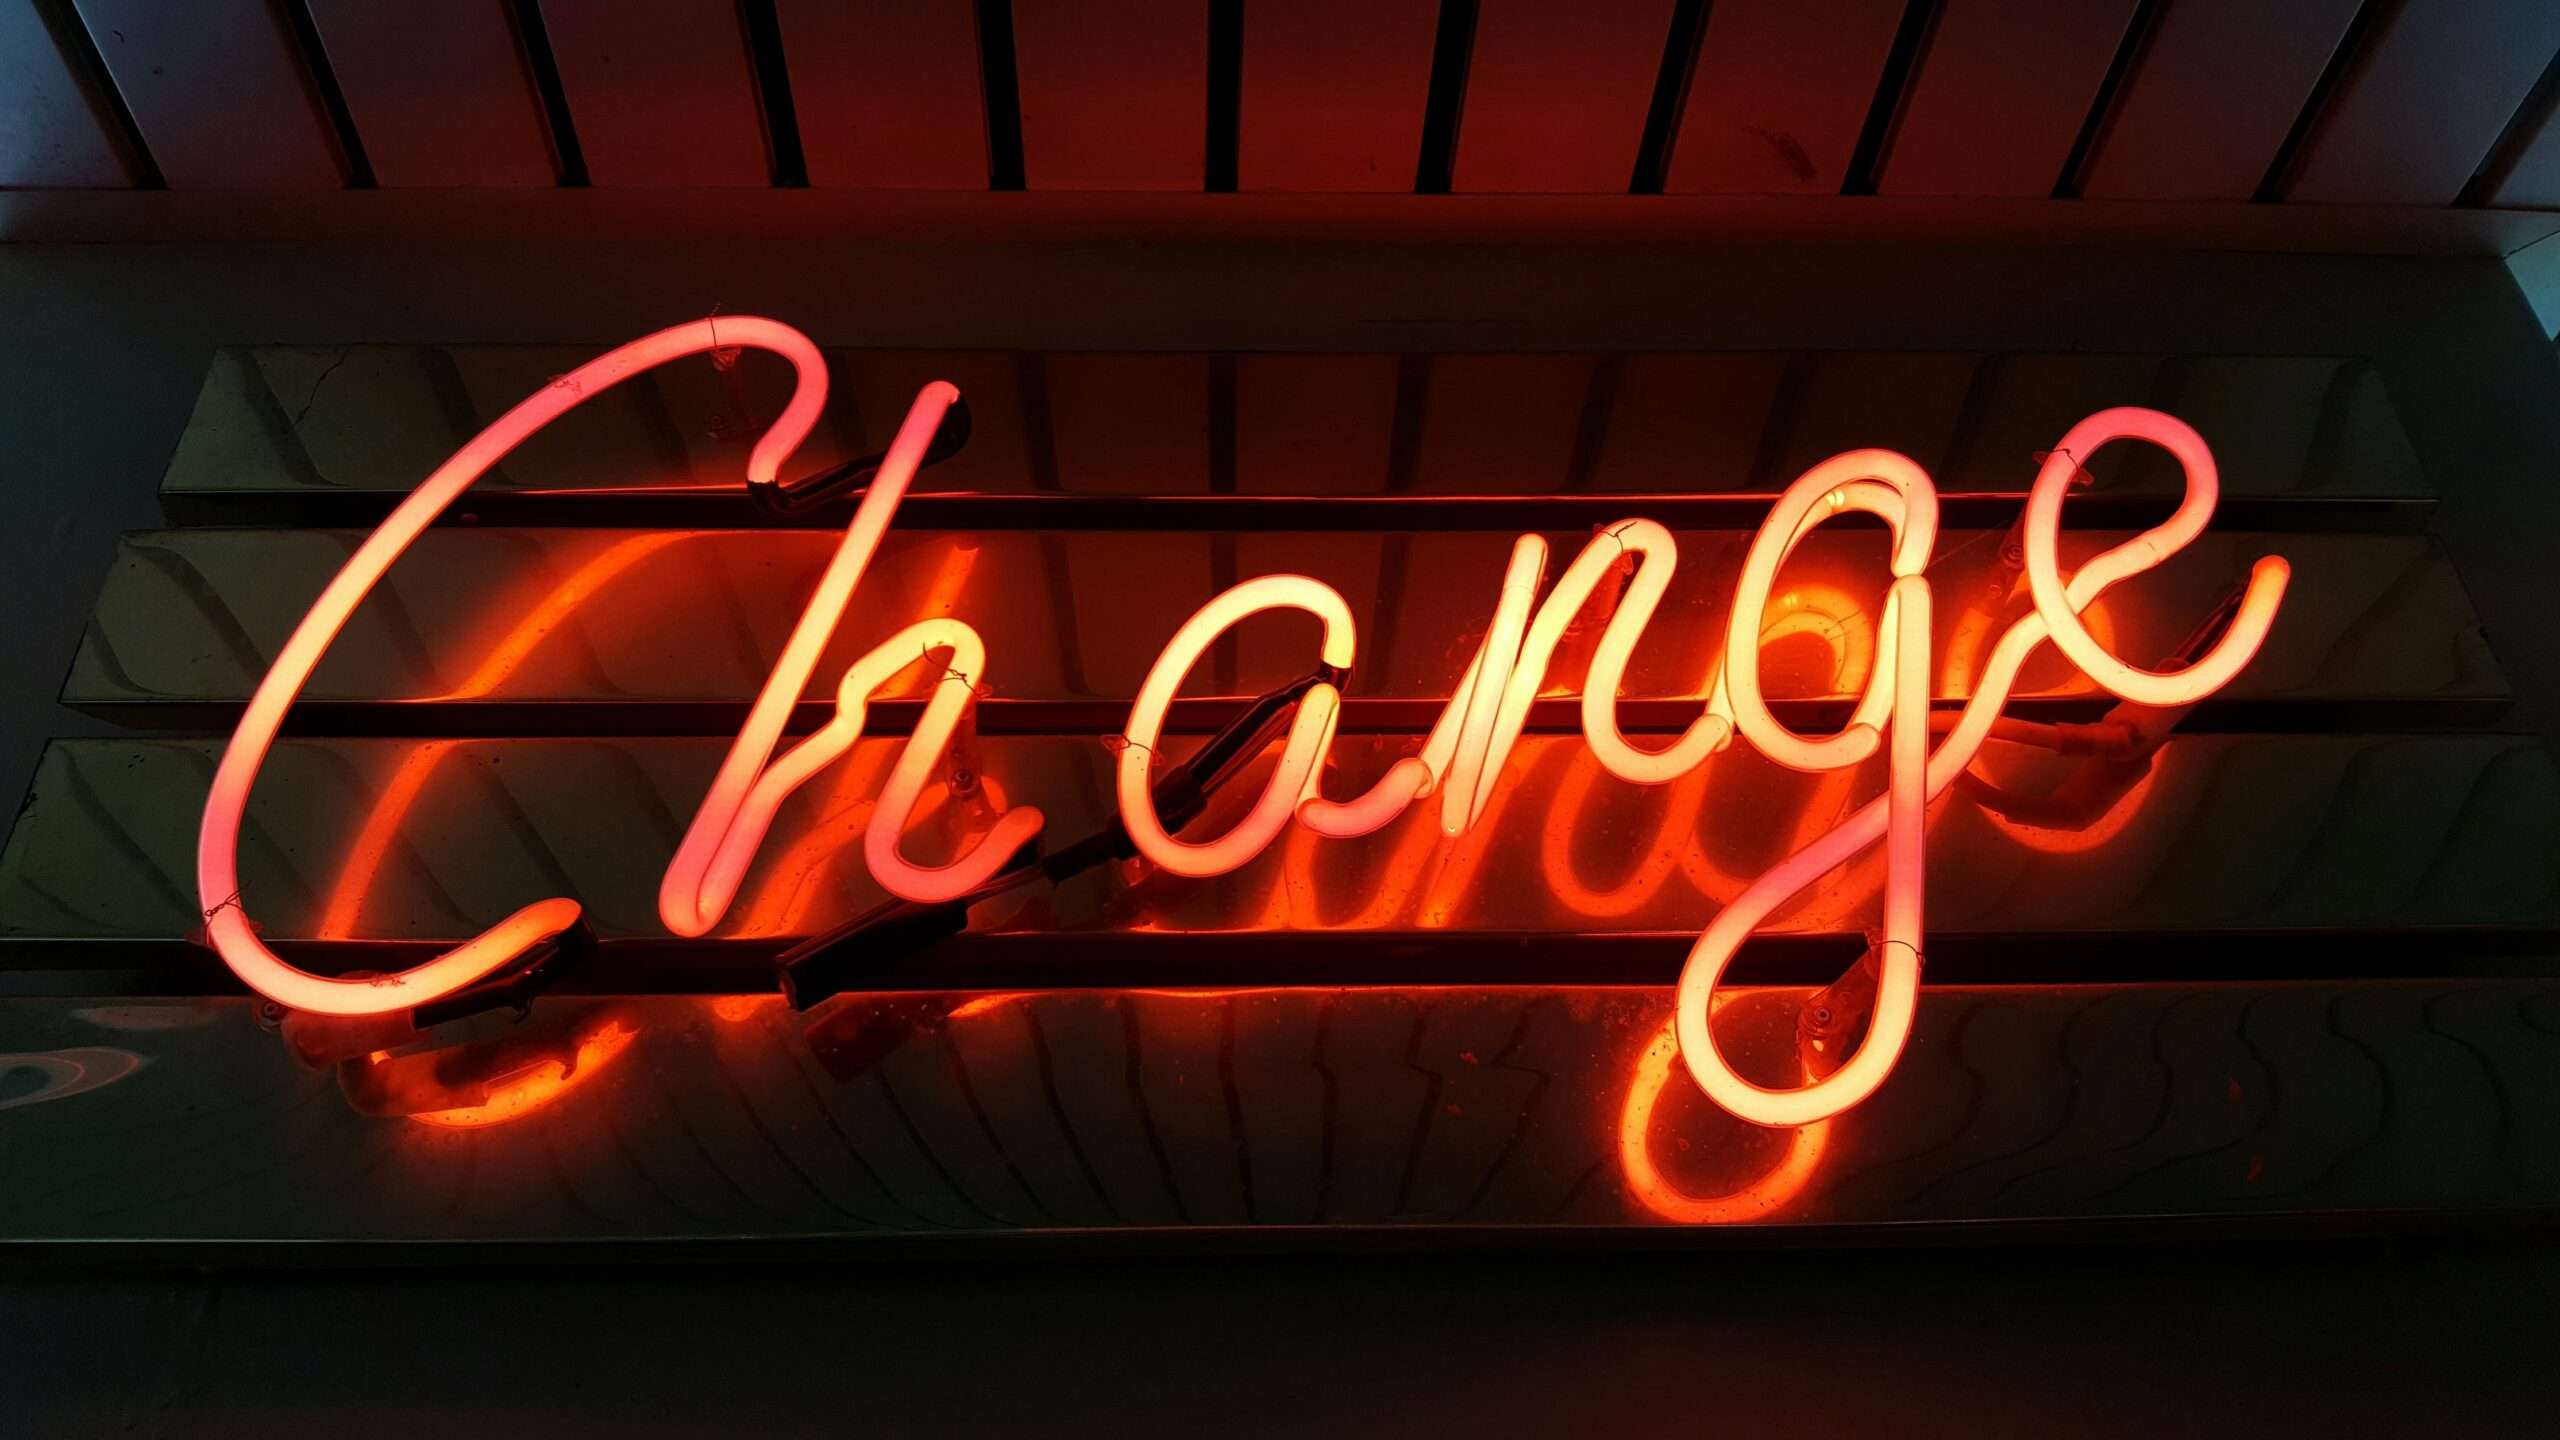 10 ways to Embrace Change and Adaptability